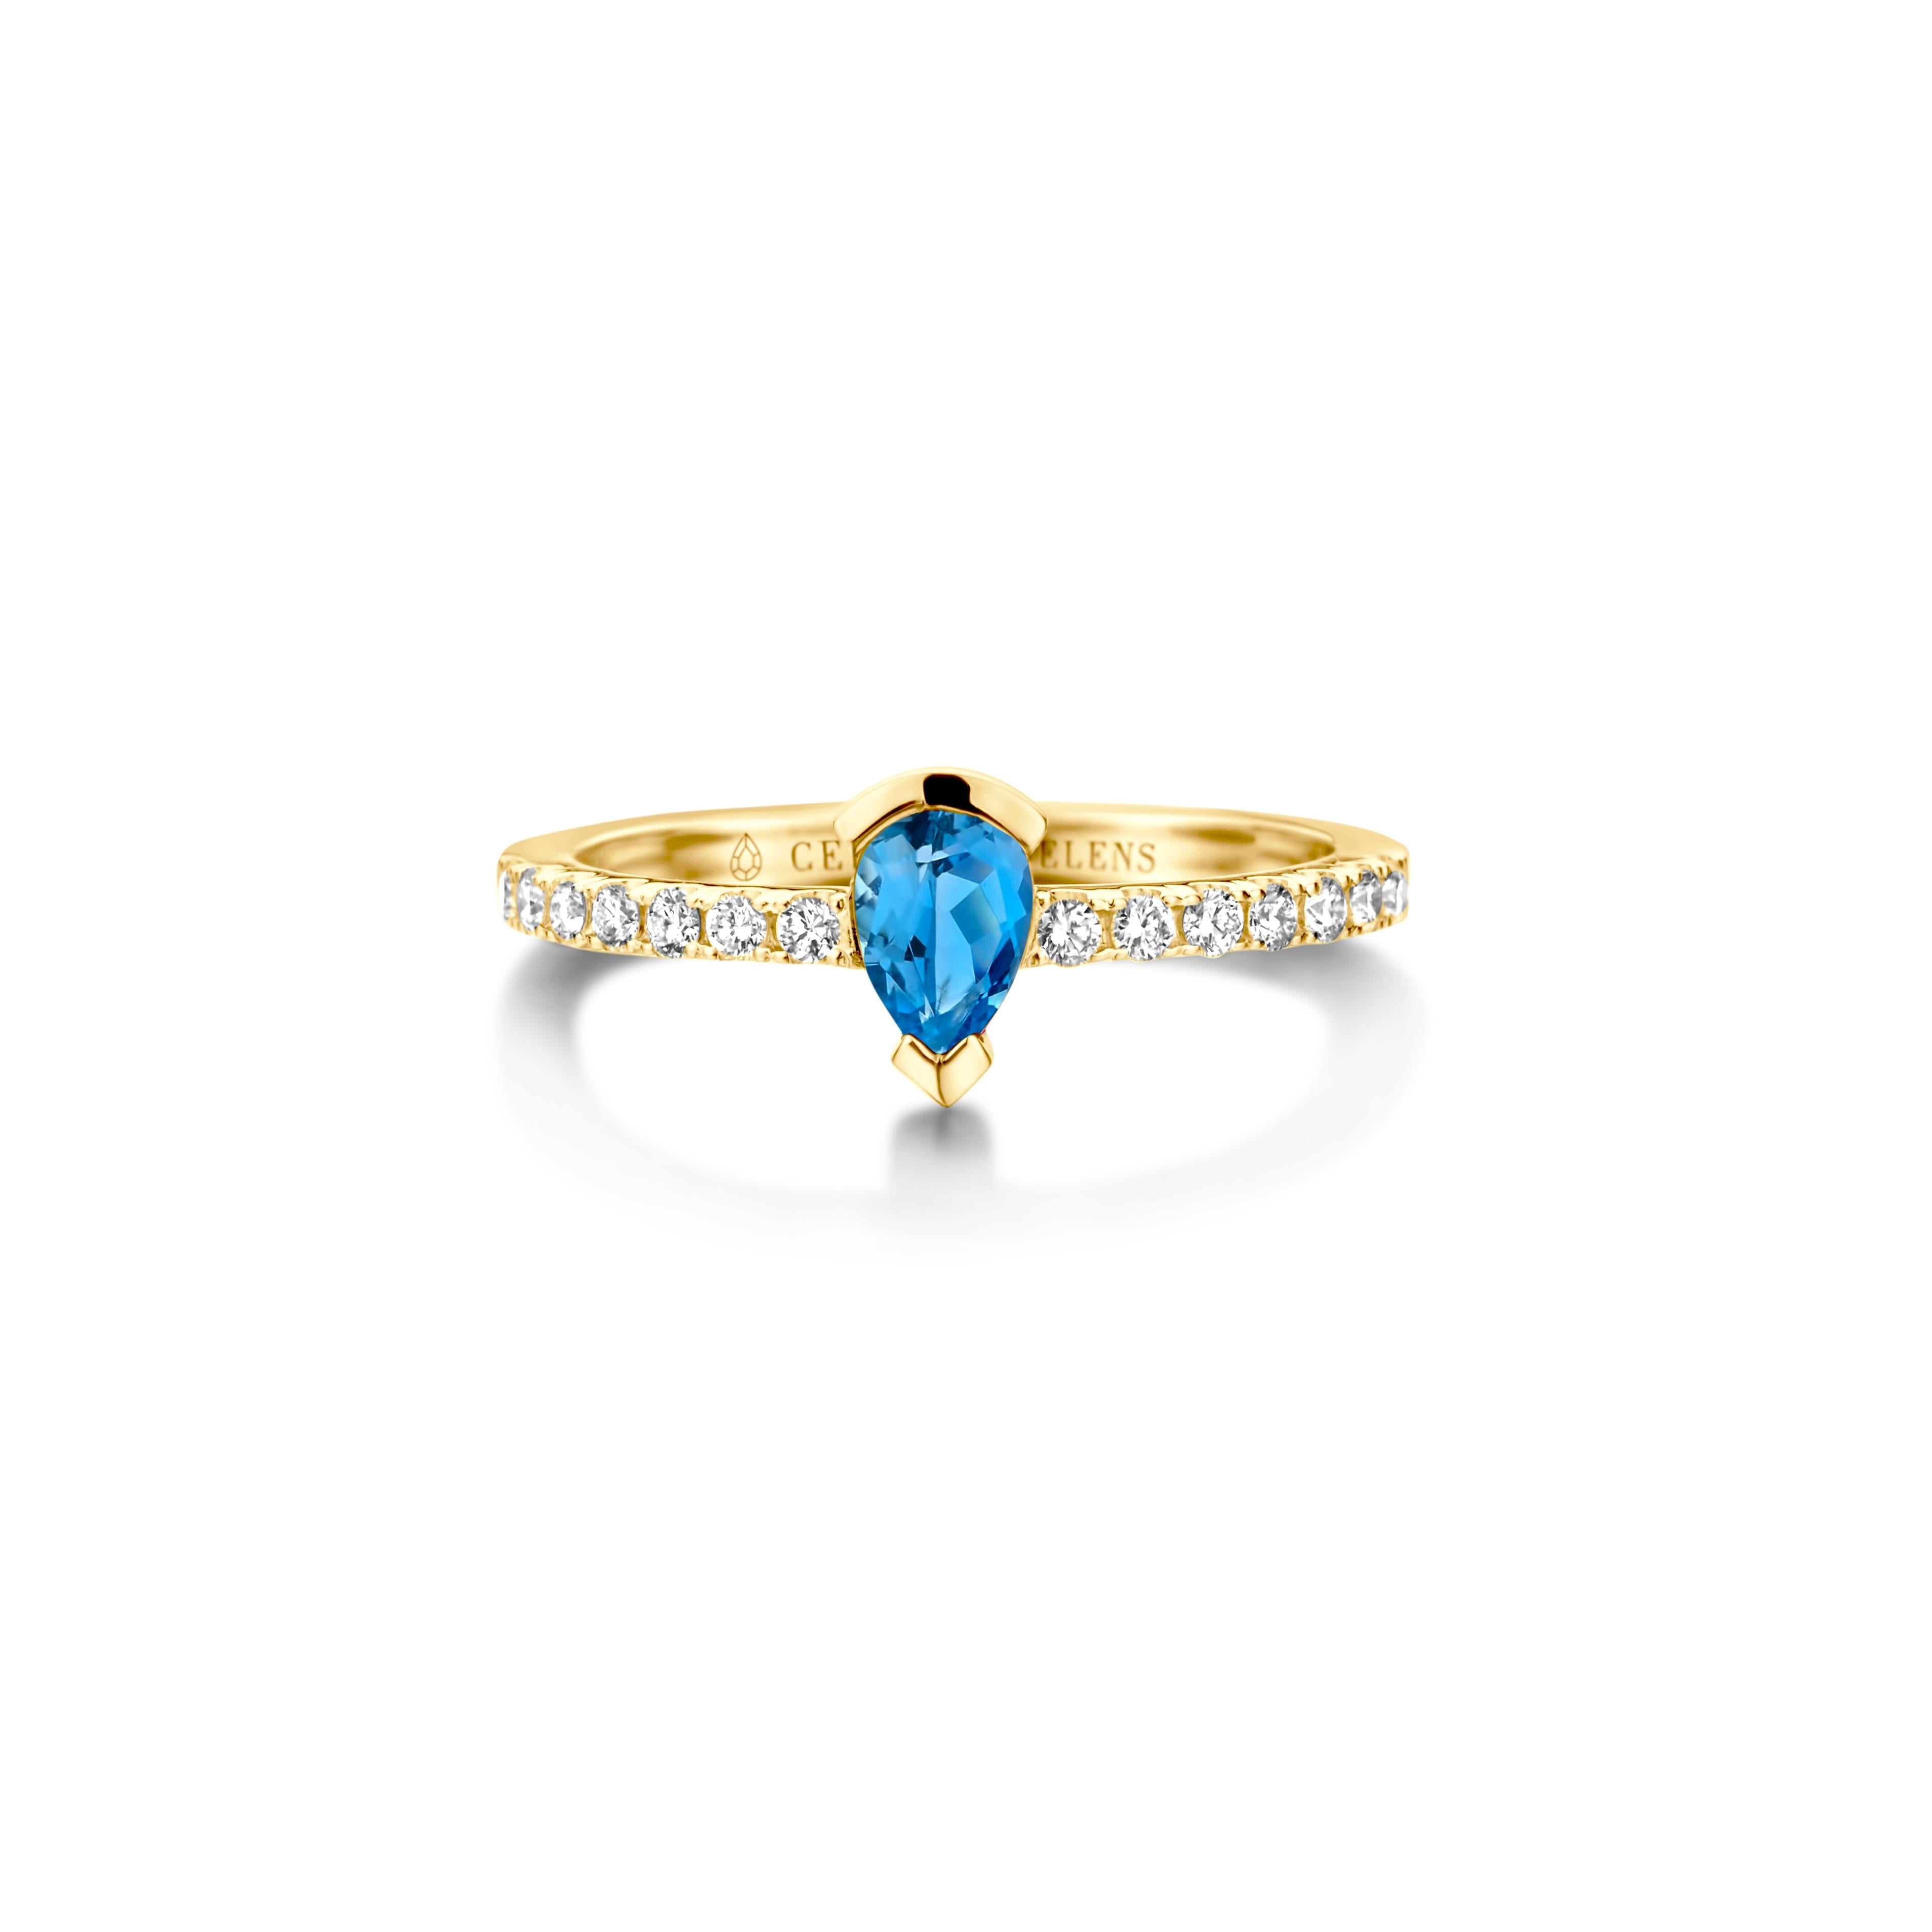 Adeline Straight ring in 18Kt white gold set with a pear-shaped Santa Maria aquamarine and 0,24 Ct of white brilliant cut diamonds - VS F quality. Also, available in yellow gold and white gold. Celine Roelens, a goldsmith and gemologist, is